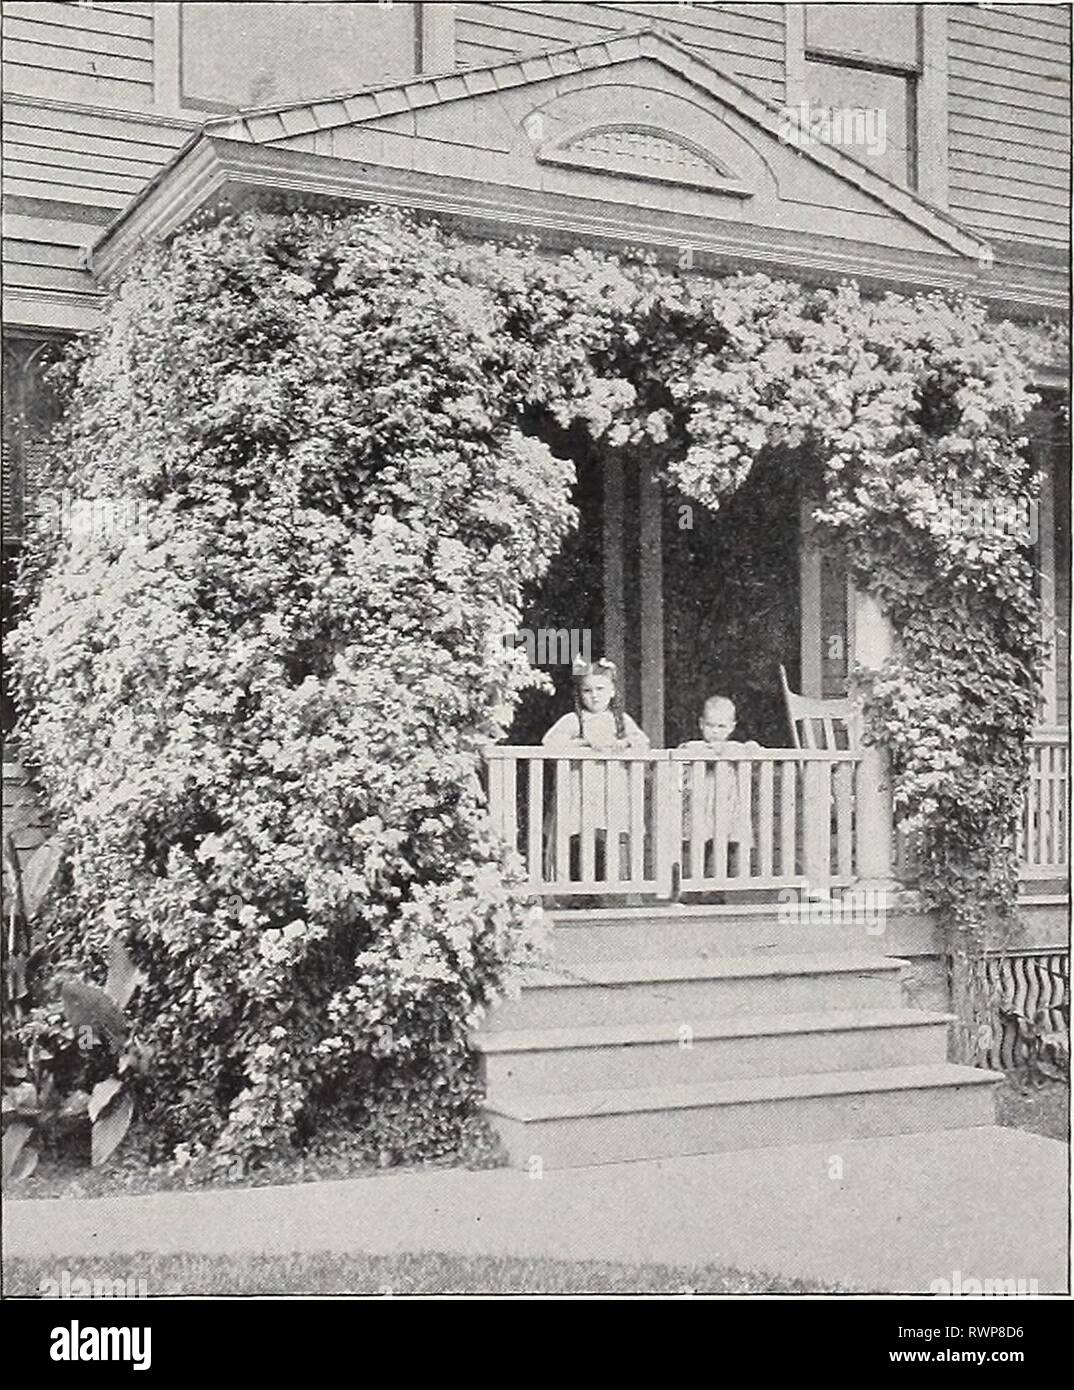 Ellwanger & Barry  Mount Ellwanger & Barry : Mount Hope nurseries ellwangerbarrymo1898moun Year: 1898  GENERAL CATALOGUE. 93 AKEBIA. Akebie, Ger. Akebie, Fr. A. quinata. A singular Japanese climbing shrub, with fine foliage, purple flowers and ornamental fruit. 35c- AMPELOPSIS. Jungfernwein, Ger. Vigne-Vierge, Fr. A. quinquefolia. American Ivy, or Virginian Creeper, Has beautiful digitate leaves that become rich crimson in autumn ; a very rapid grower. Like the Bignonia and Lvy, it throws out tendrils and roots at the joints, by which it fastens itself to anything it touches. One of the finest Stock Photo